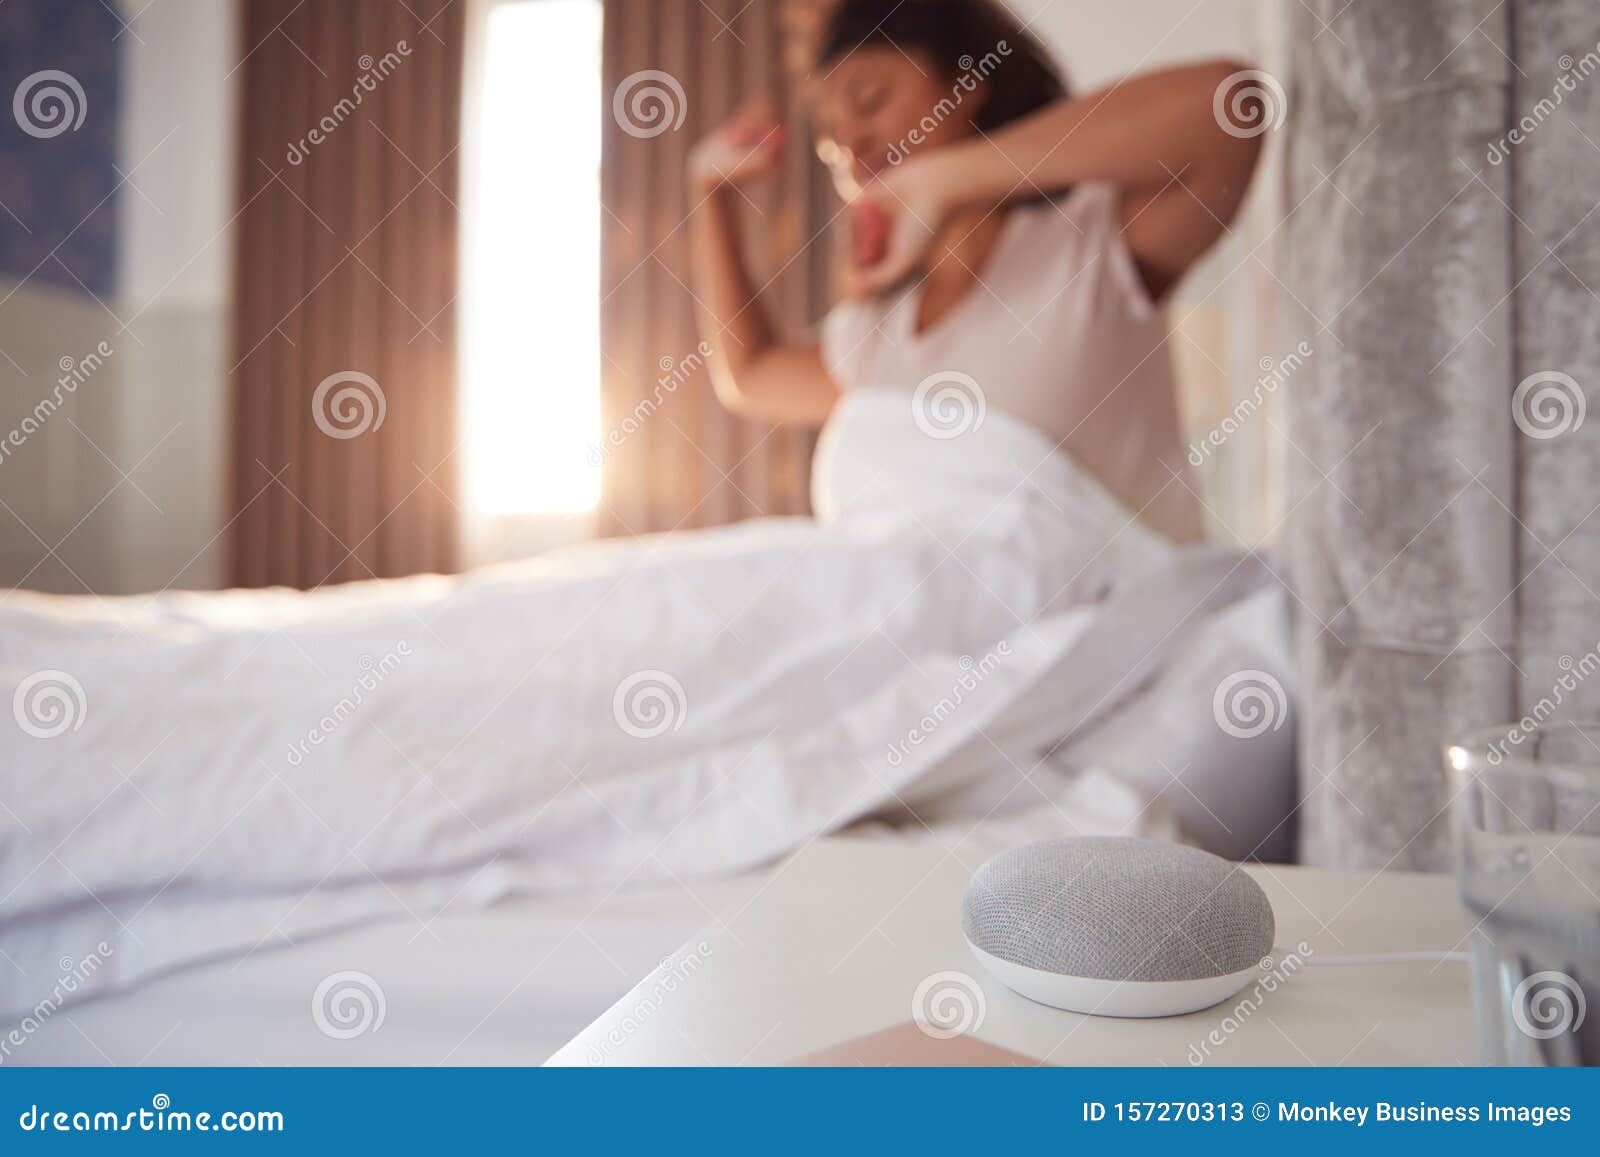 woman waking up in bed with voice assistant on bedside table next to her